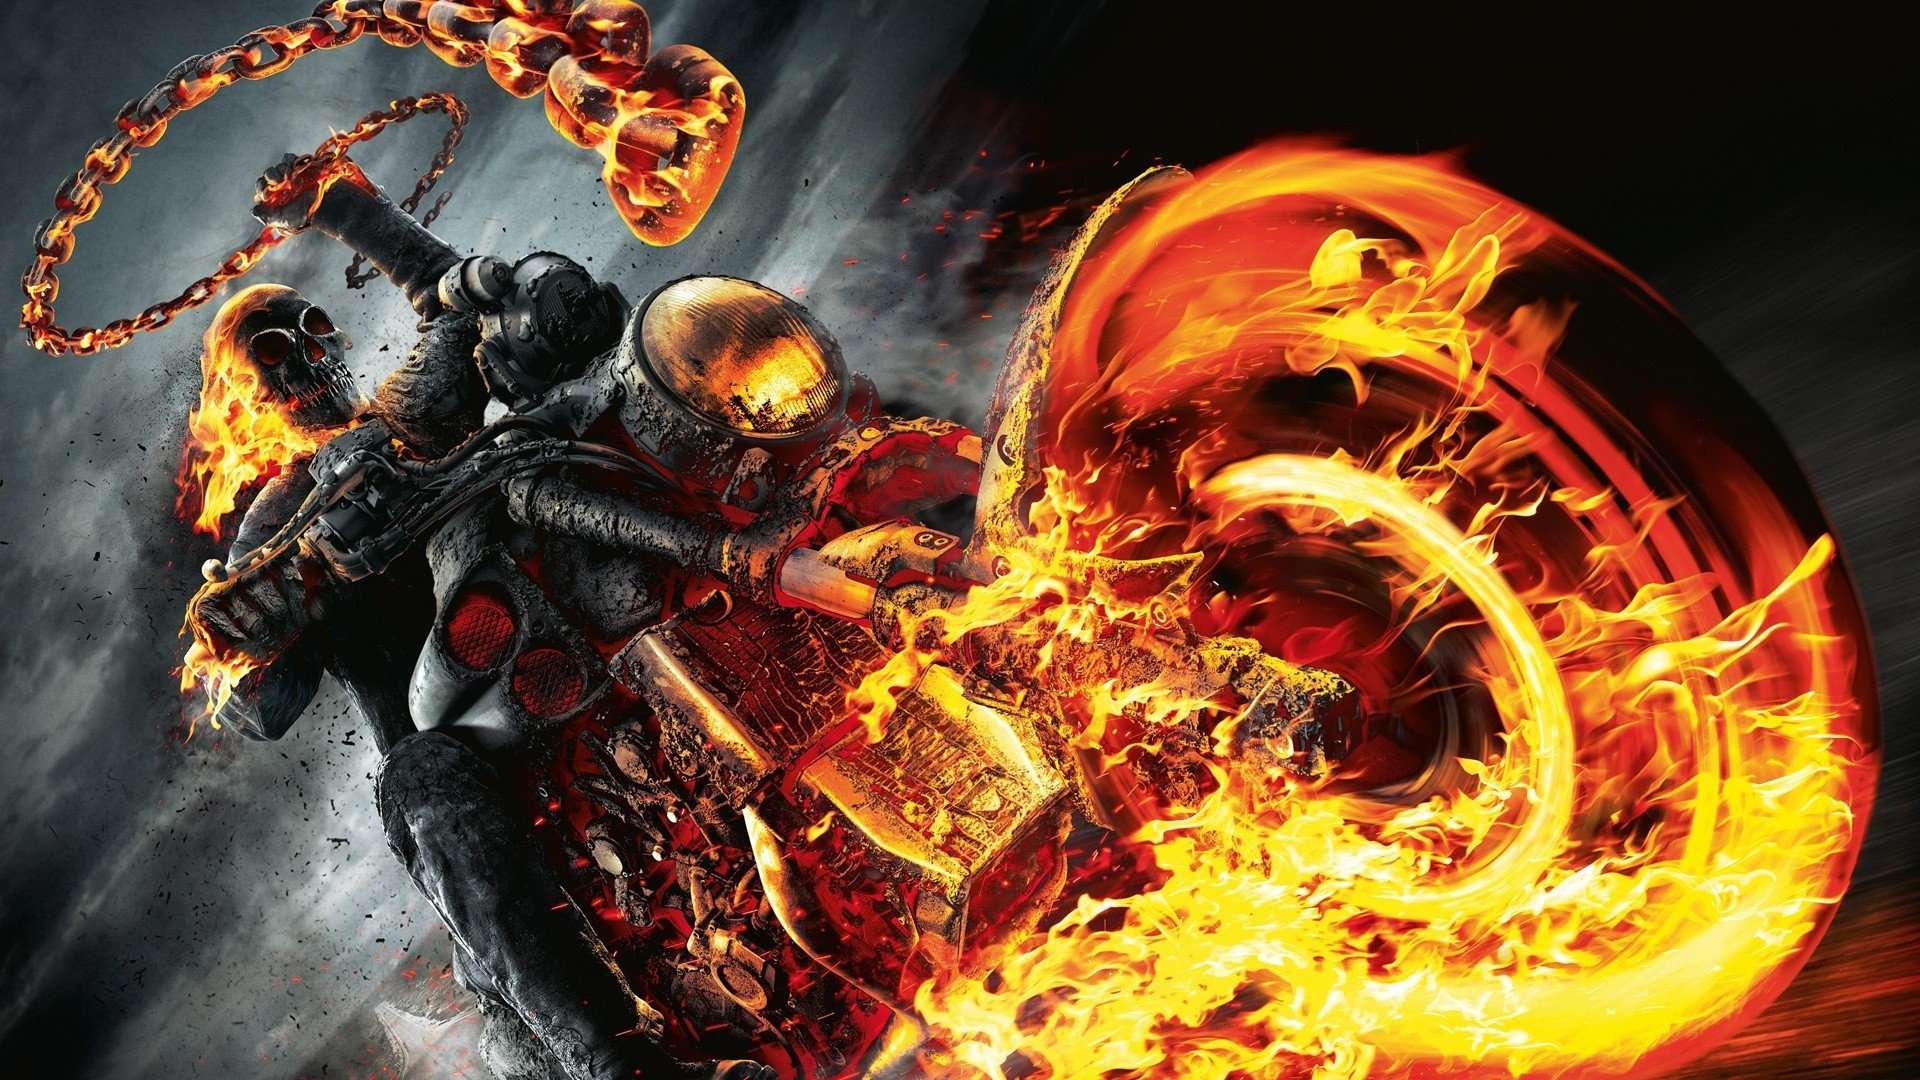 ghost rider hd wallpaper,cg artwork,fictional character,games,graphic design,graphics